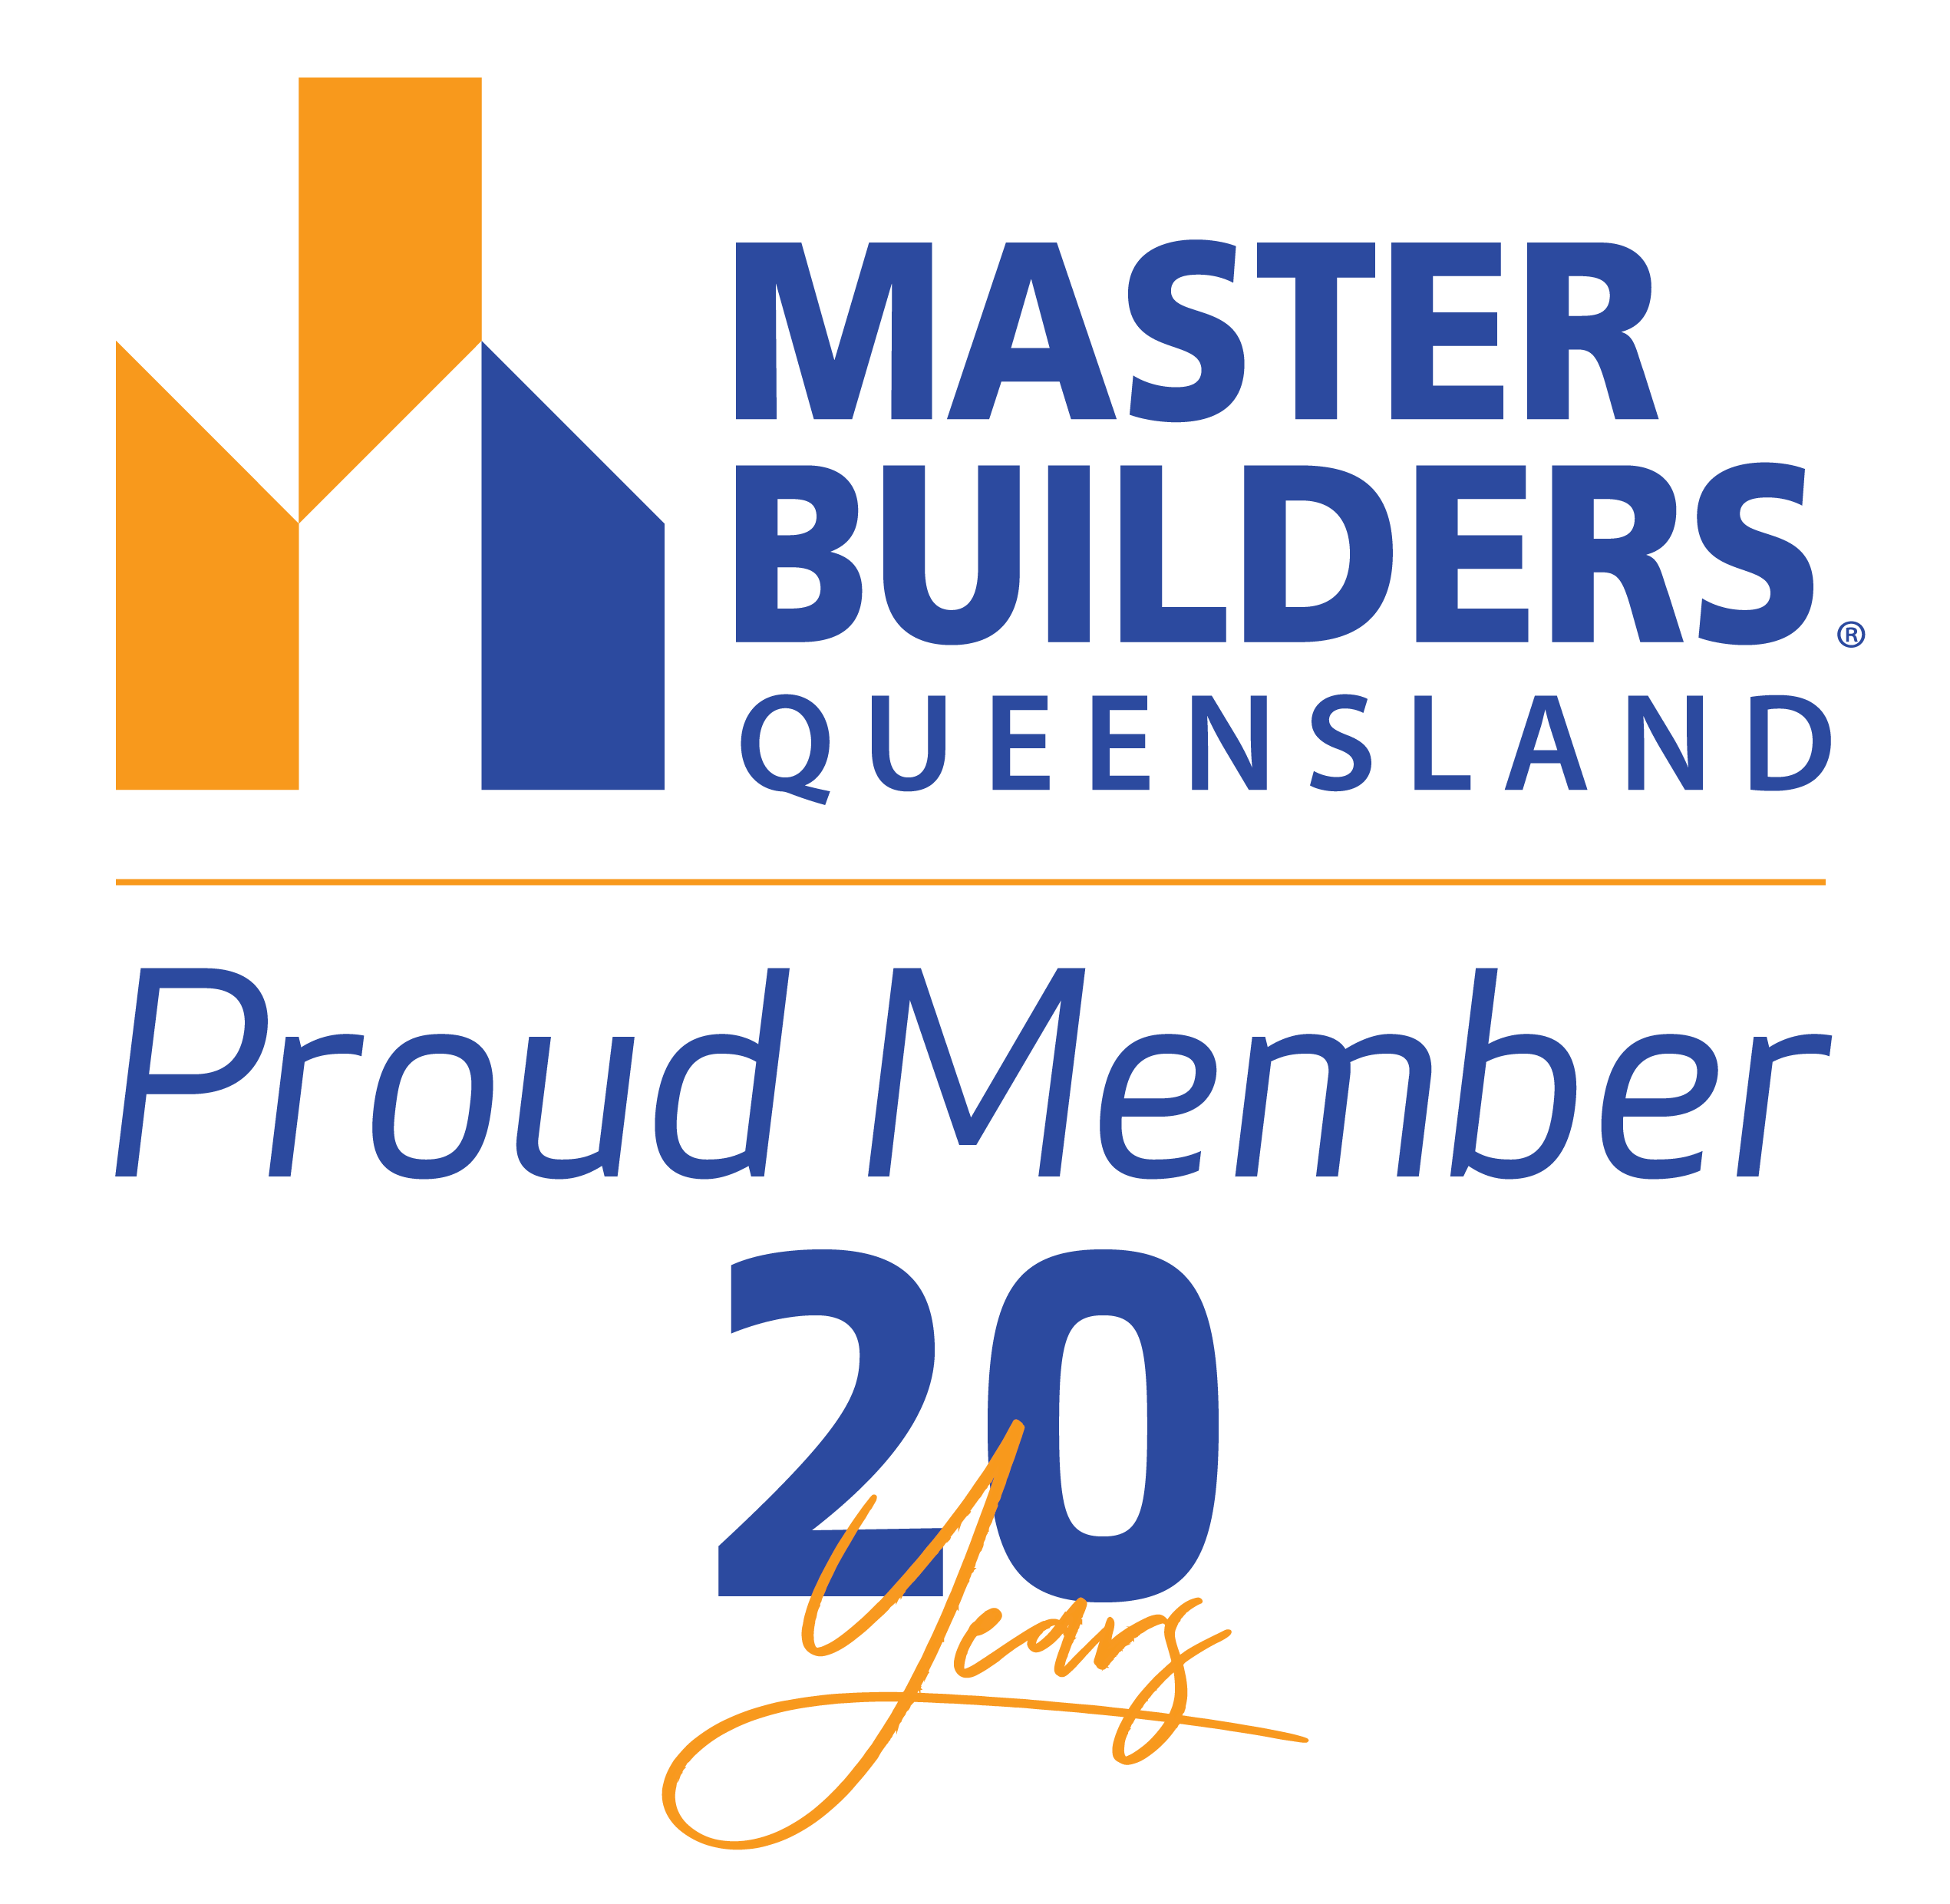 Member of the Master Builder's Association for 20 Years